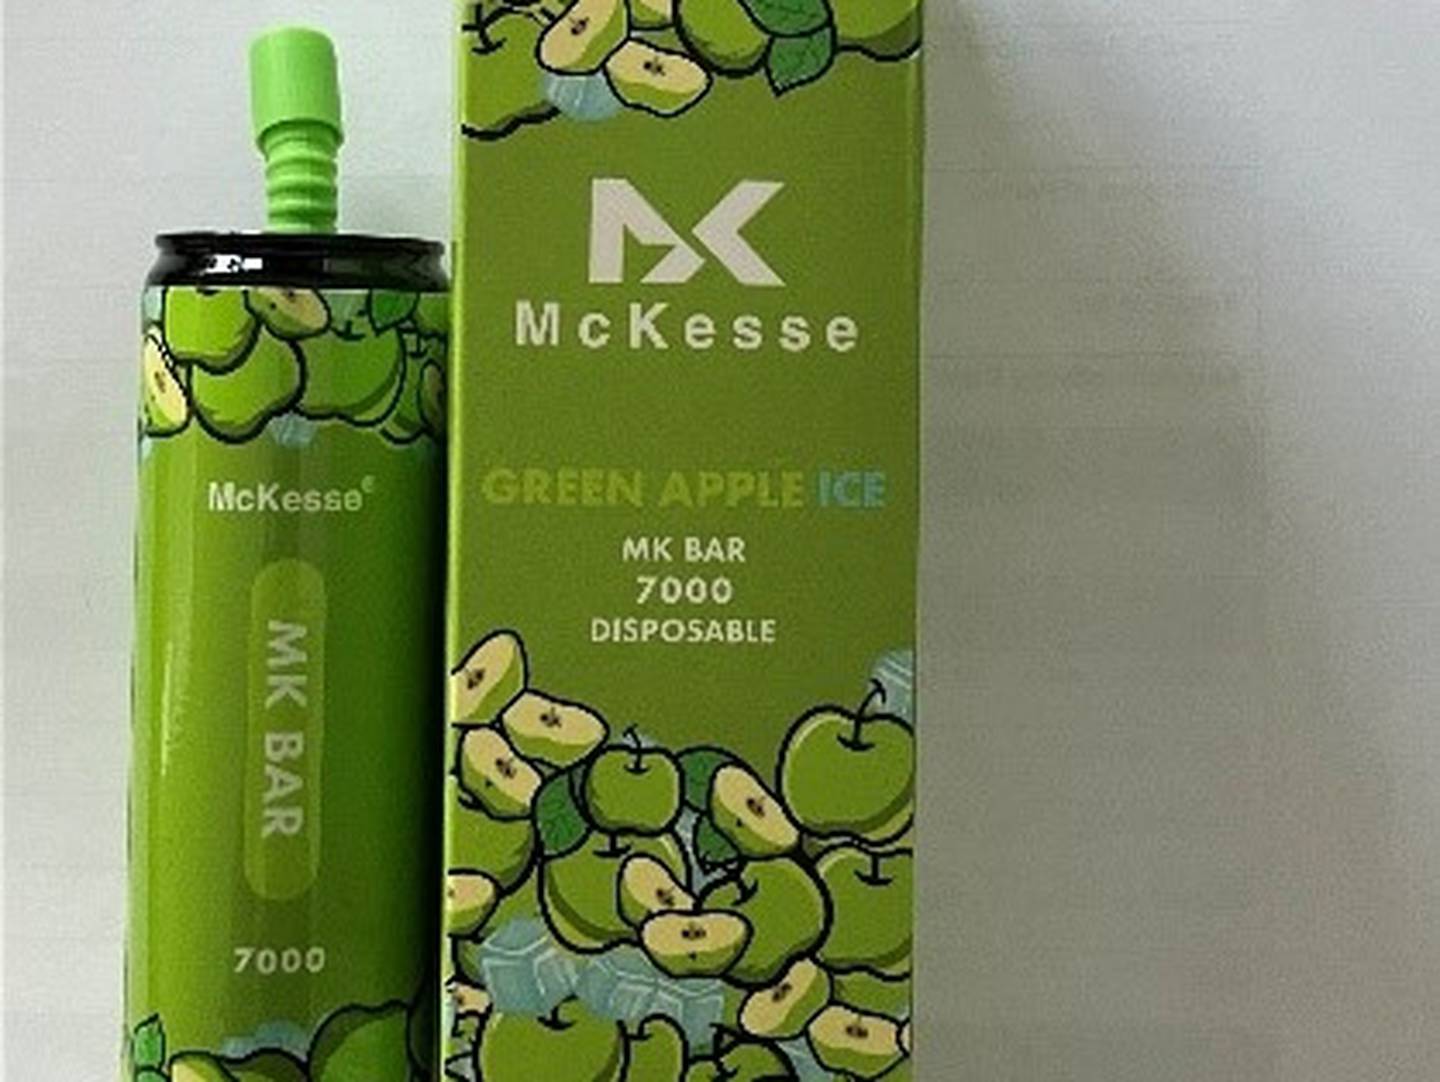 MK BAR Recalled in Ireland Due to Excessive Nicotine Levels